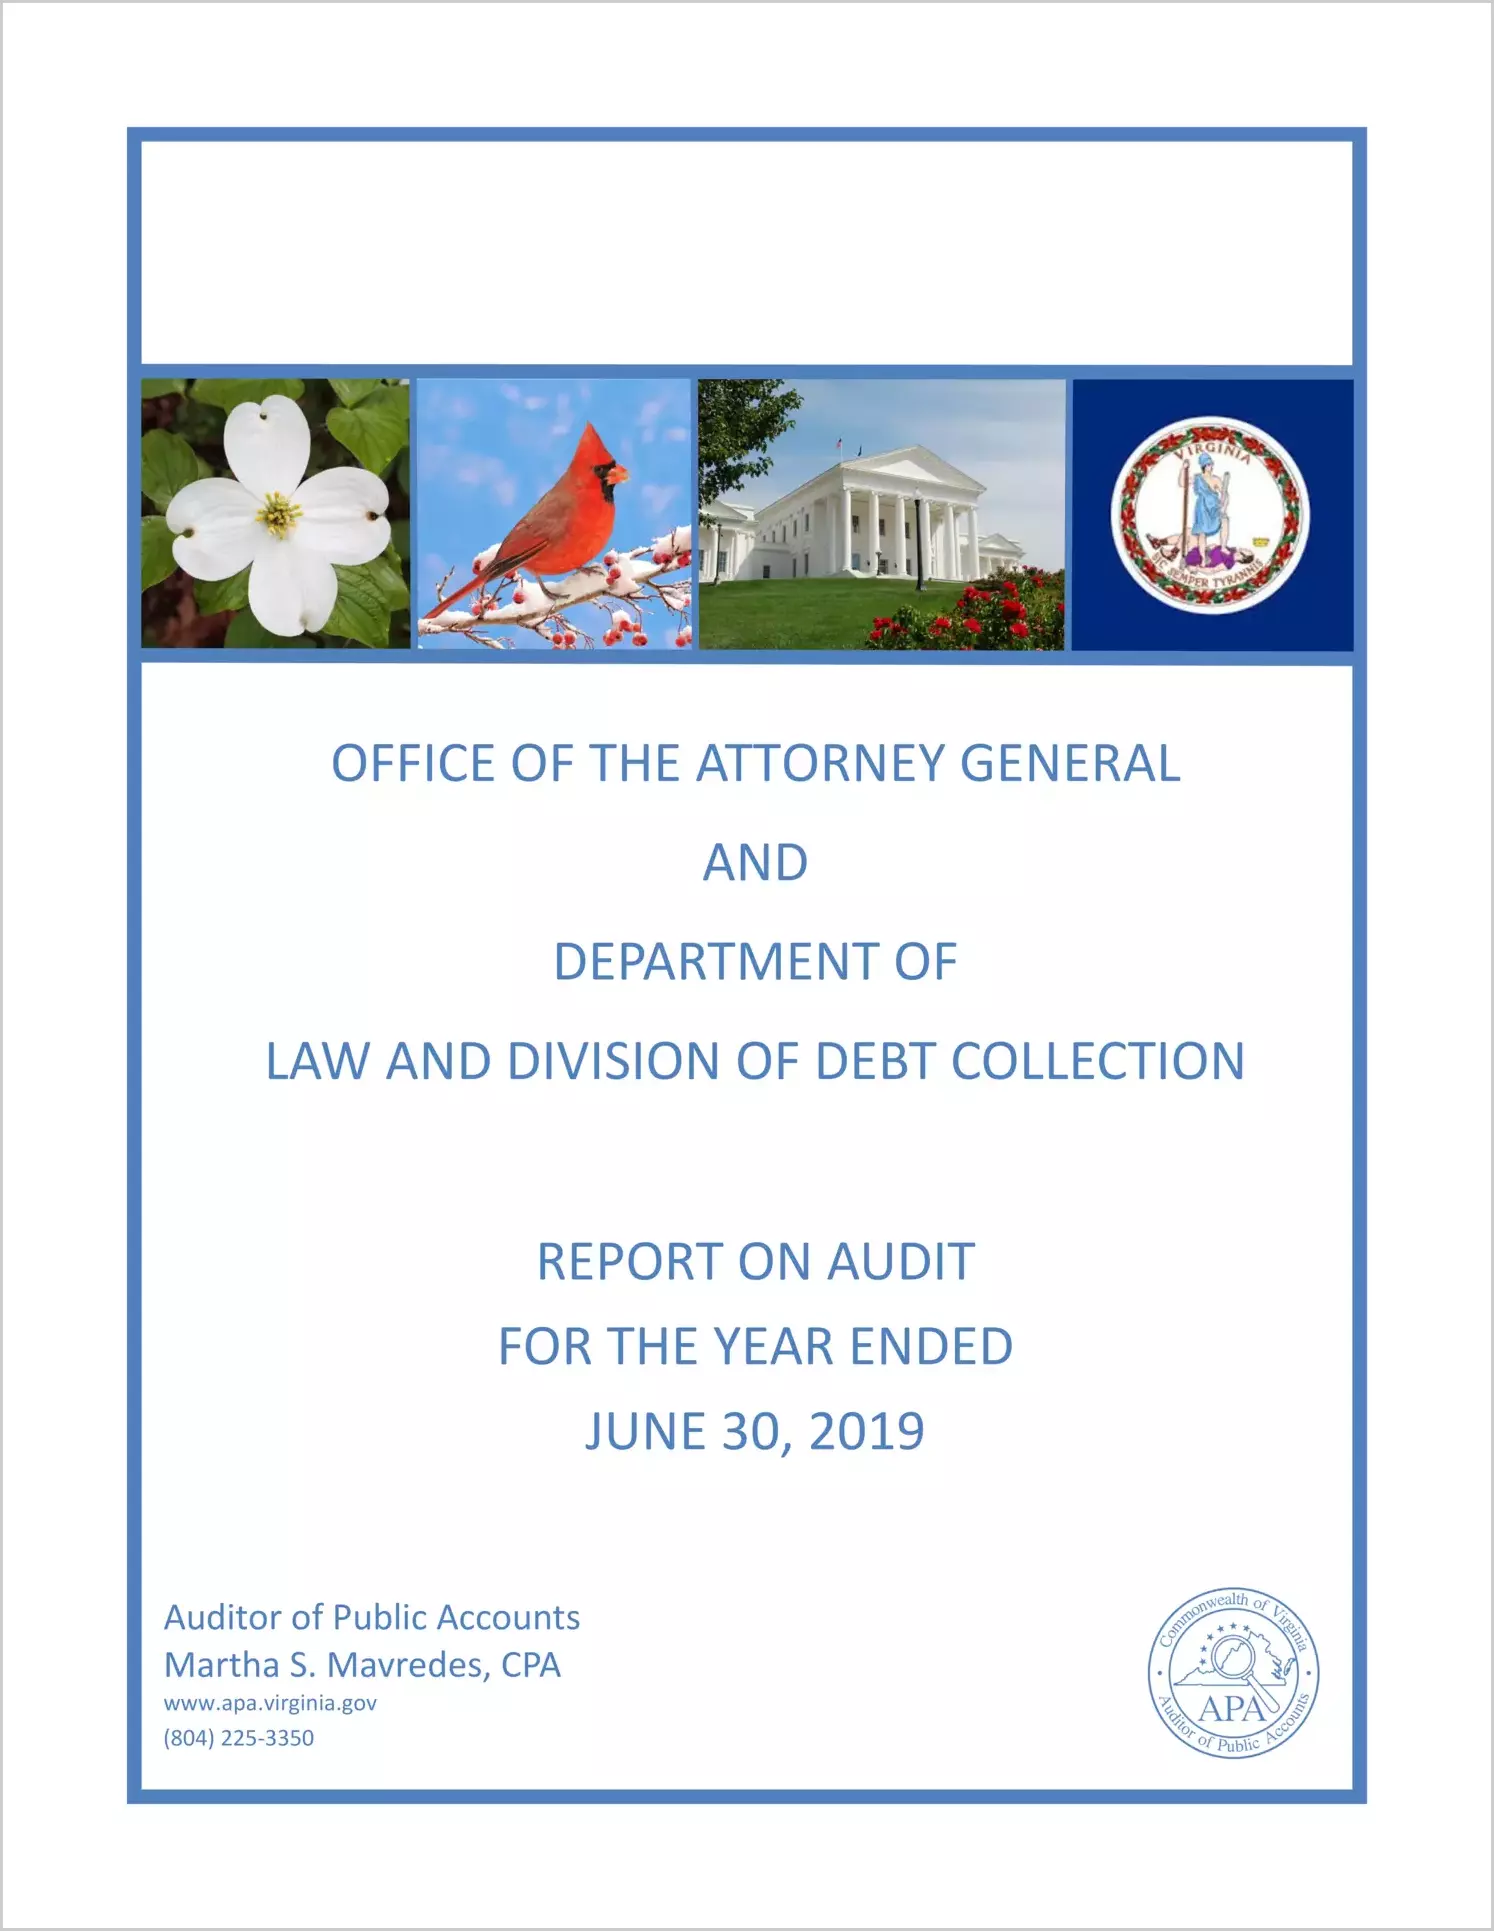 Office of the Attorney General and Department of Law and Division of Debt Collection for the year ended June 30, 2019